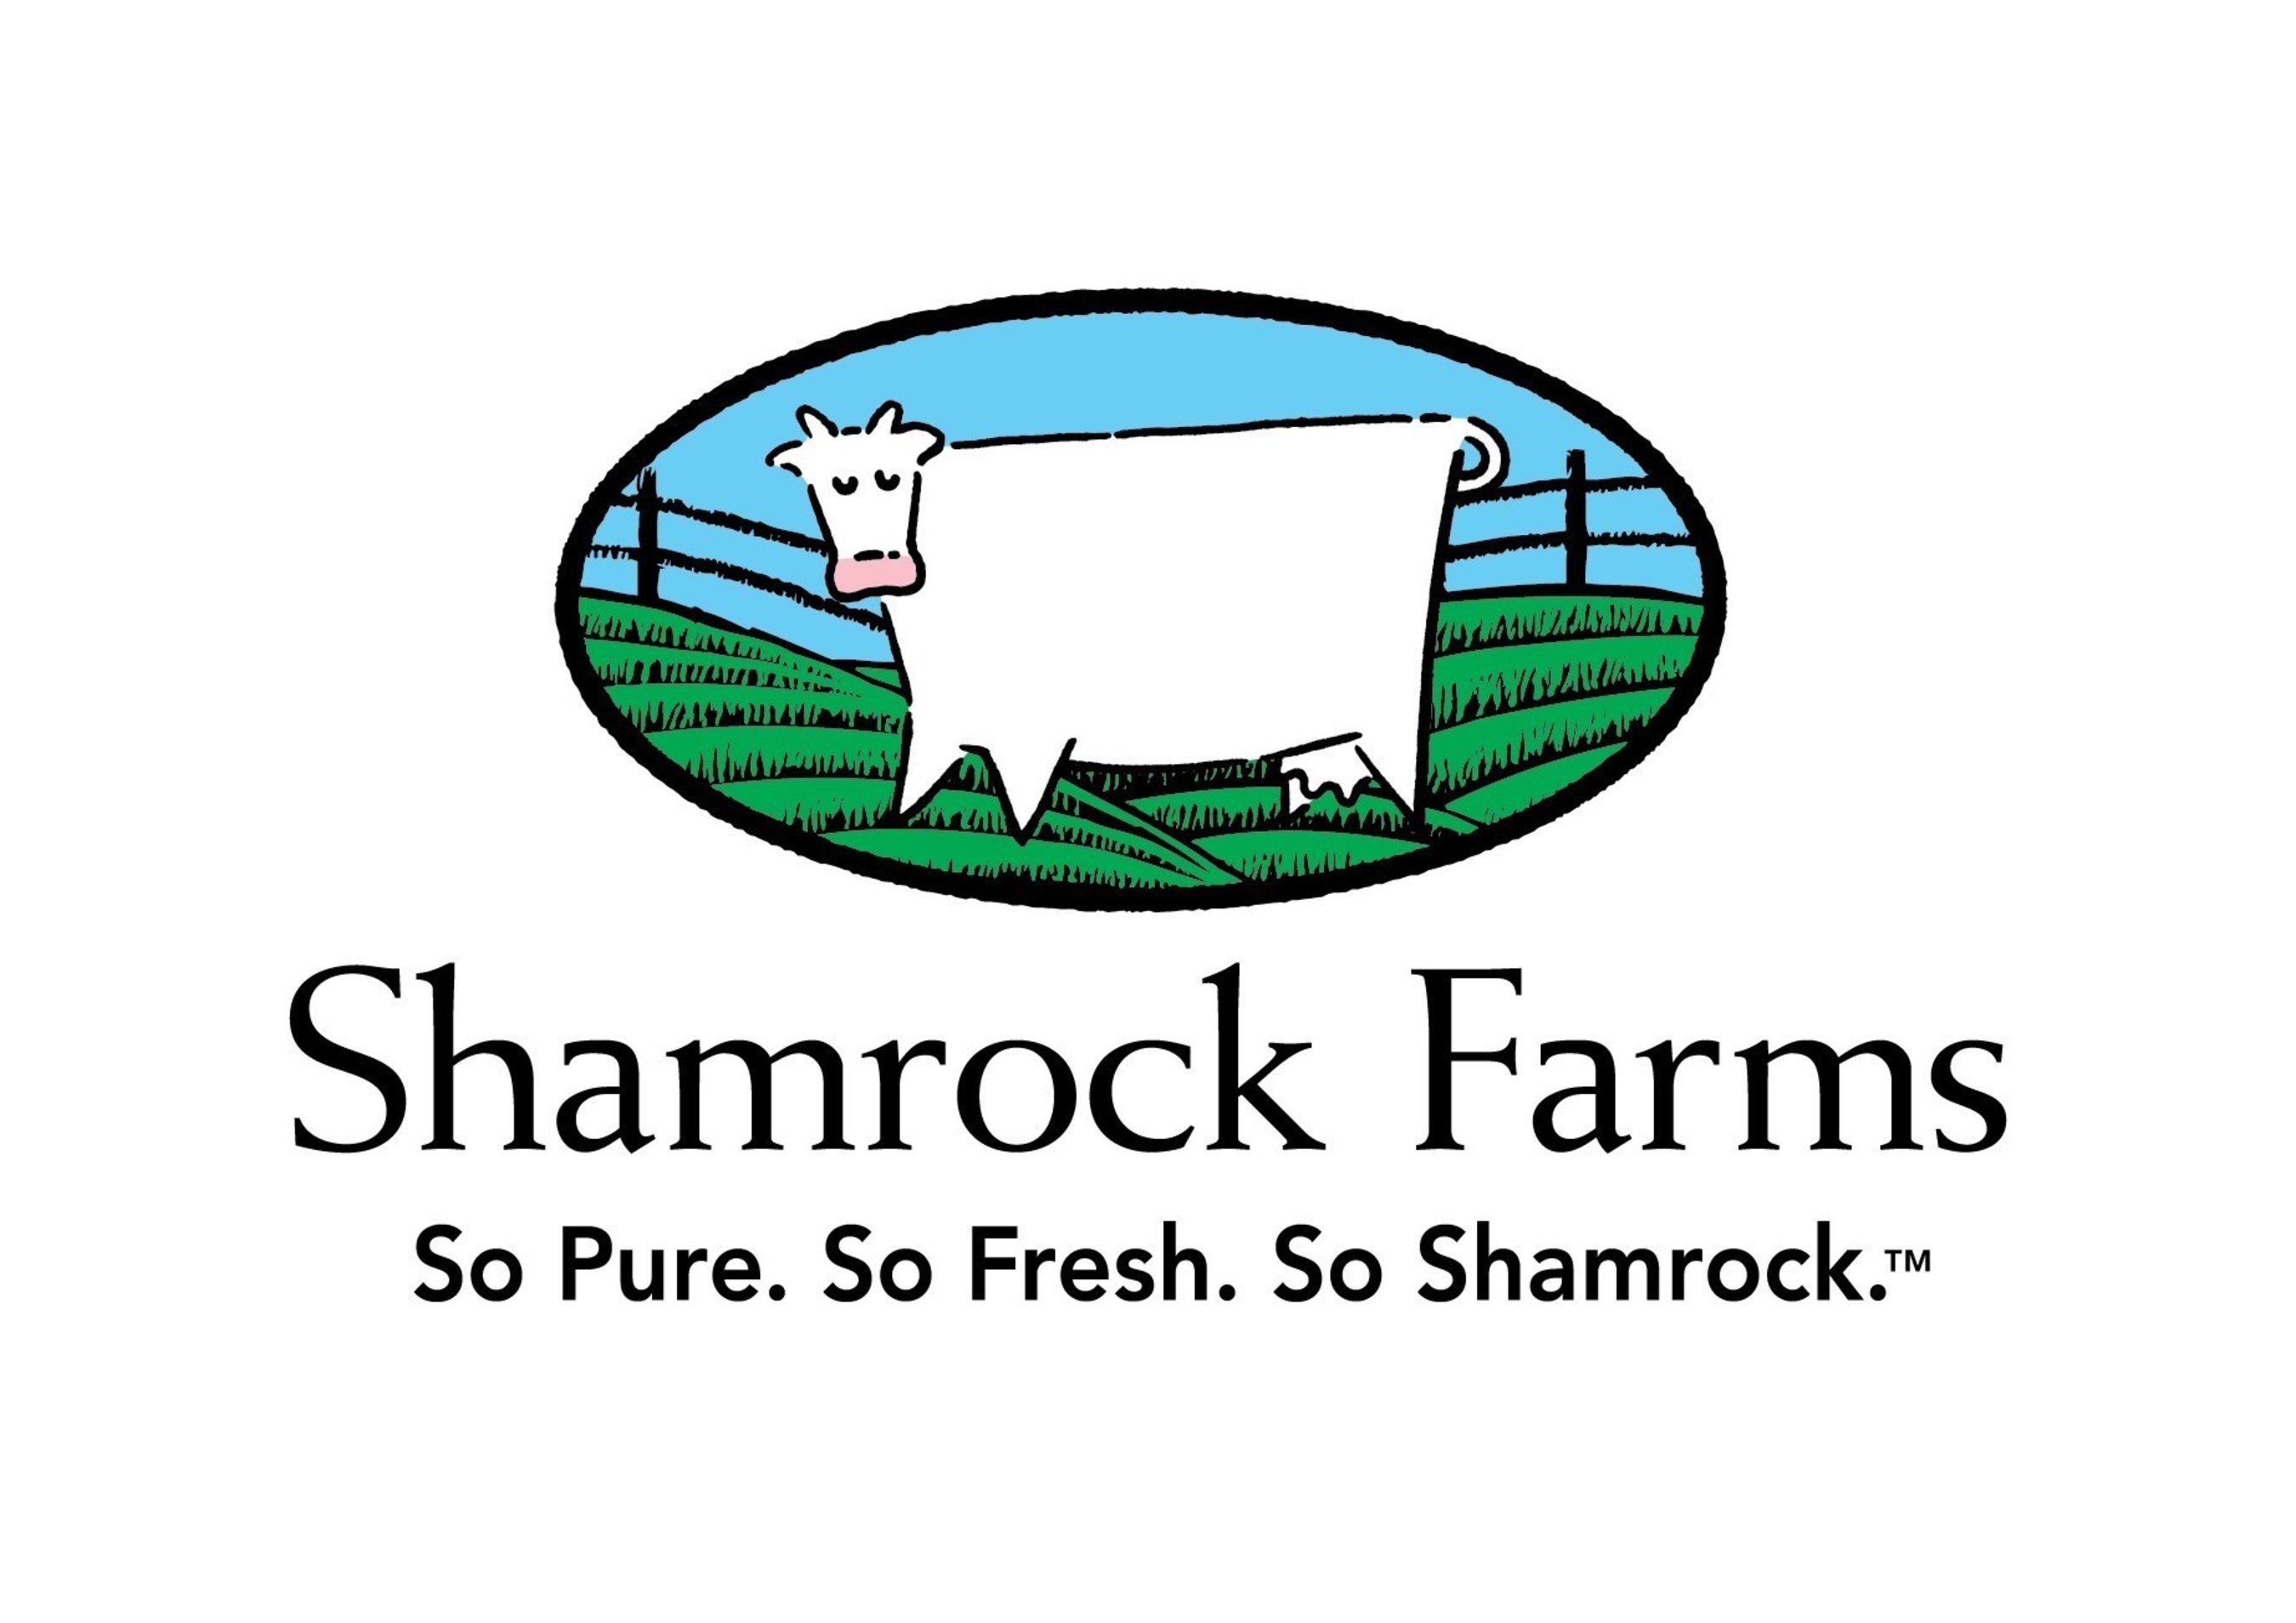 Shamrock Farms Launches New Brand Campaign, Effort to Support MilkPEP's sponsorship of the U.S. Olympic Team